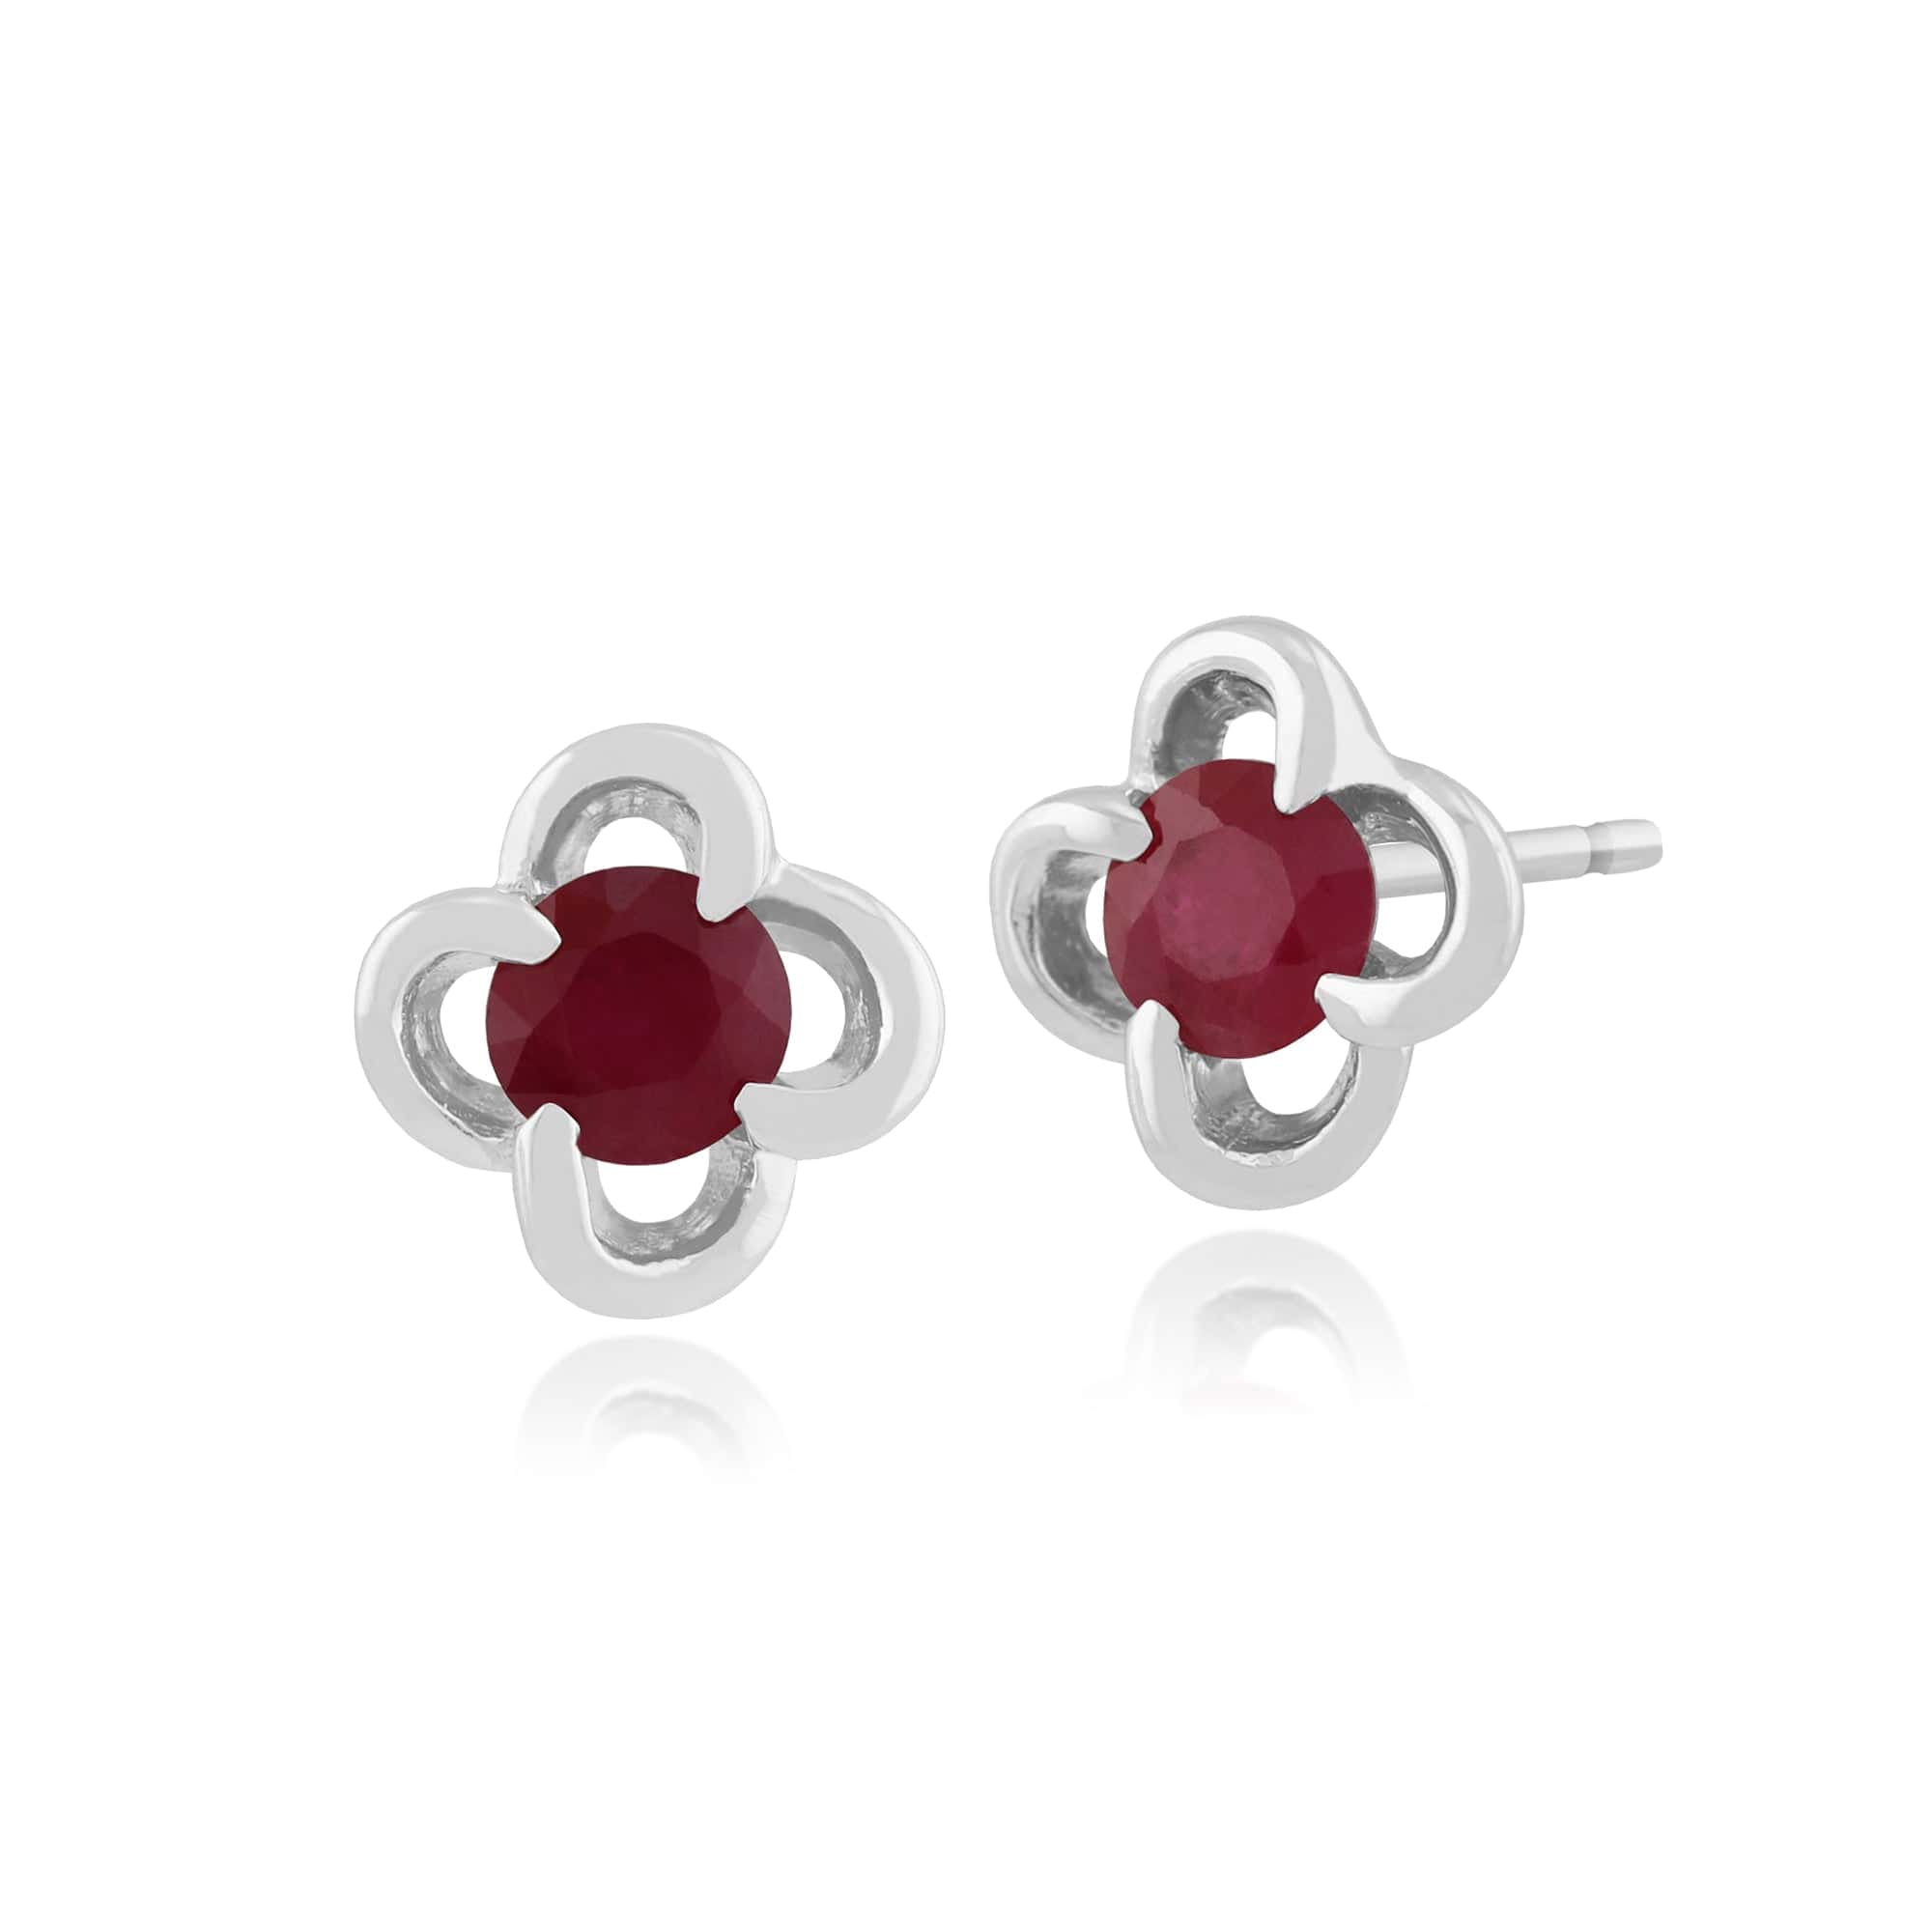 Floral Round Ruby & Diamond Halo Stud Earrings in 9ct White Gold - Gemondo